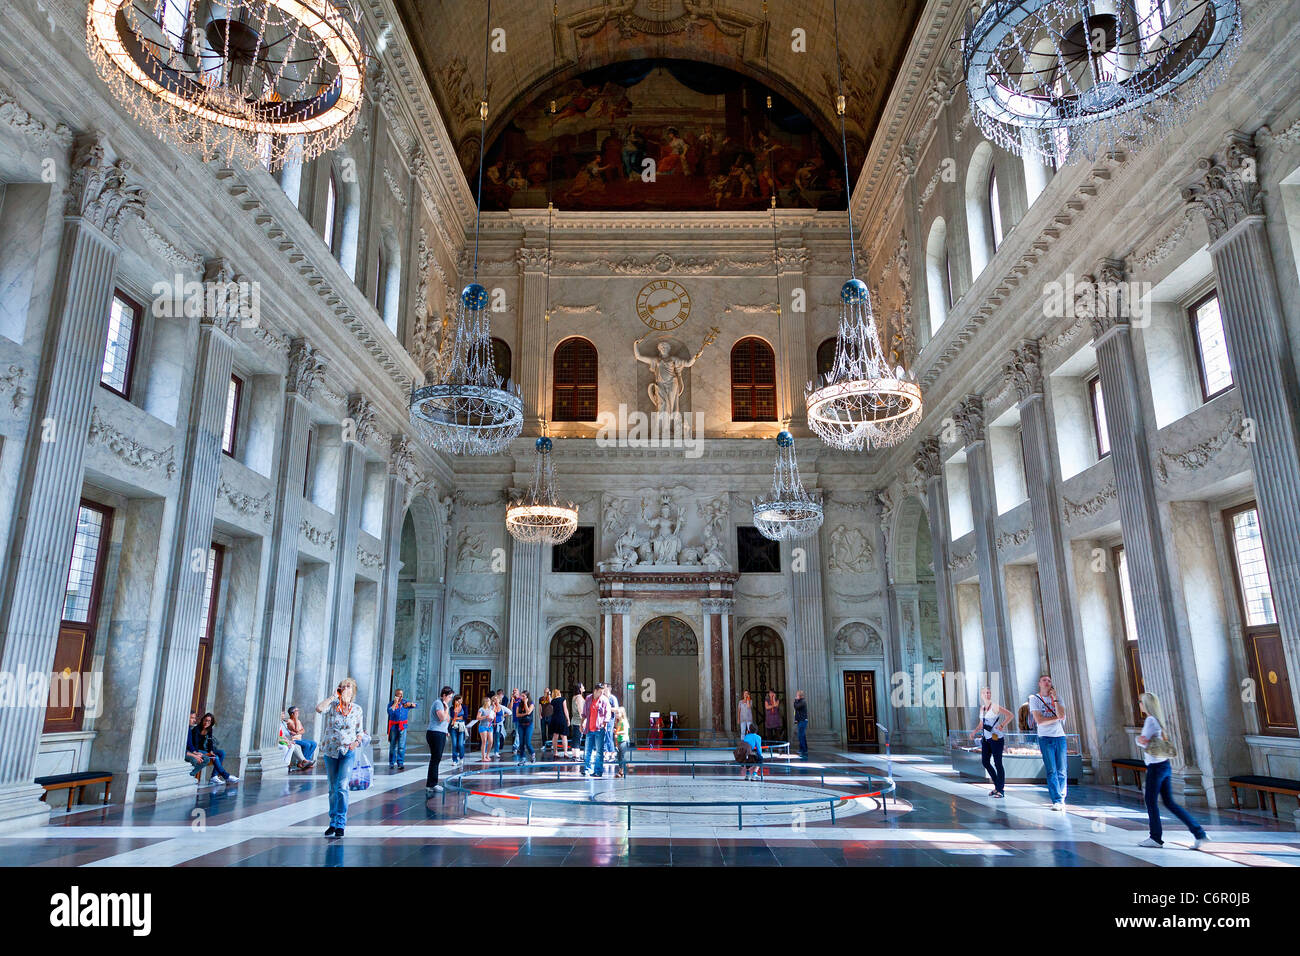 The Citizens' hall in the Royal Palace on Dam Square in Amsterdam Stock Photo